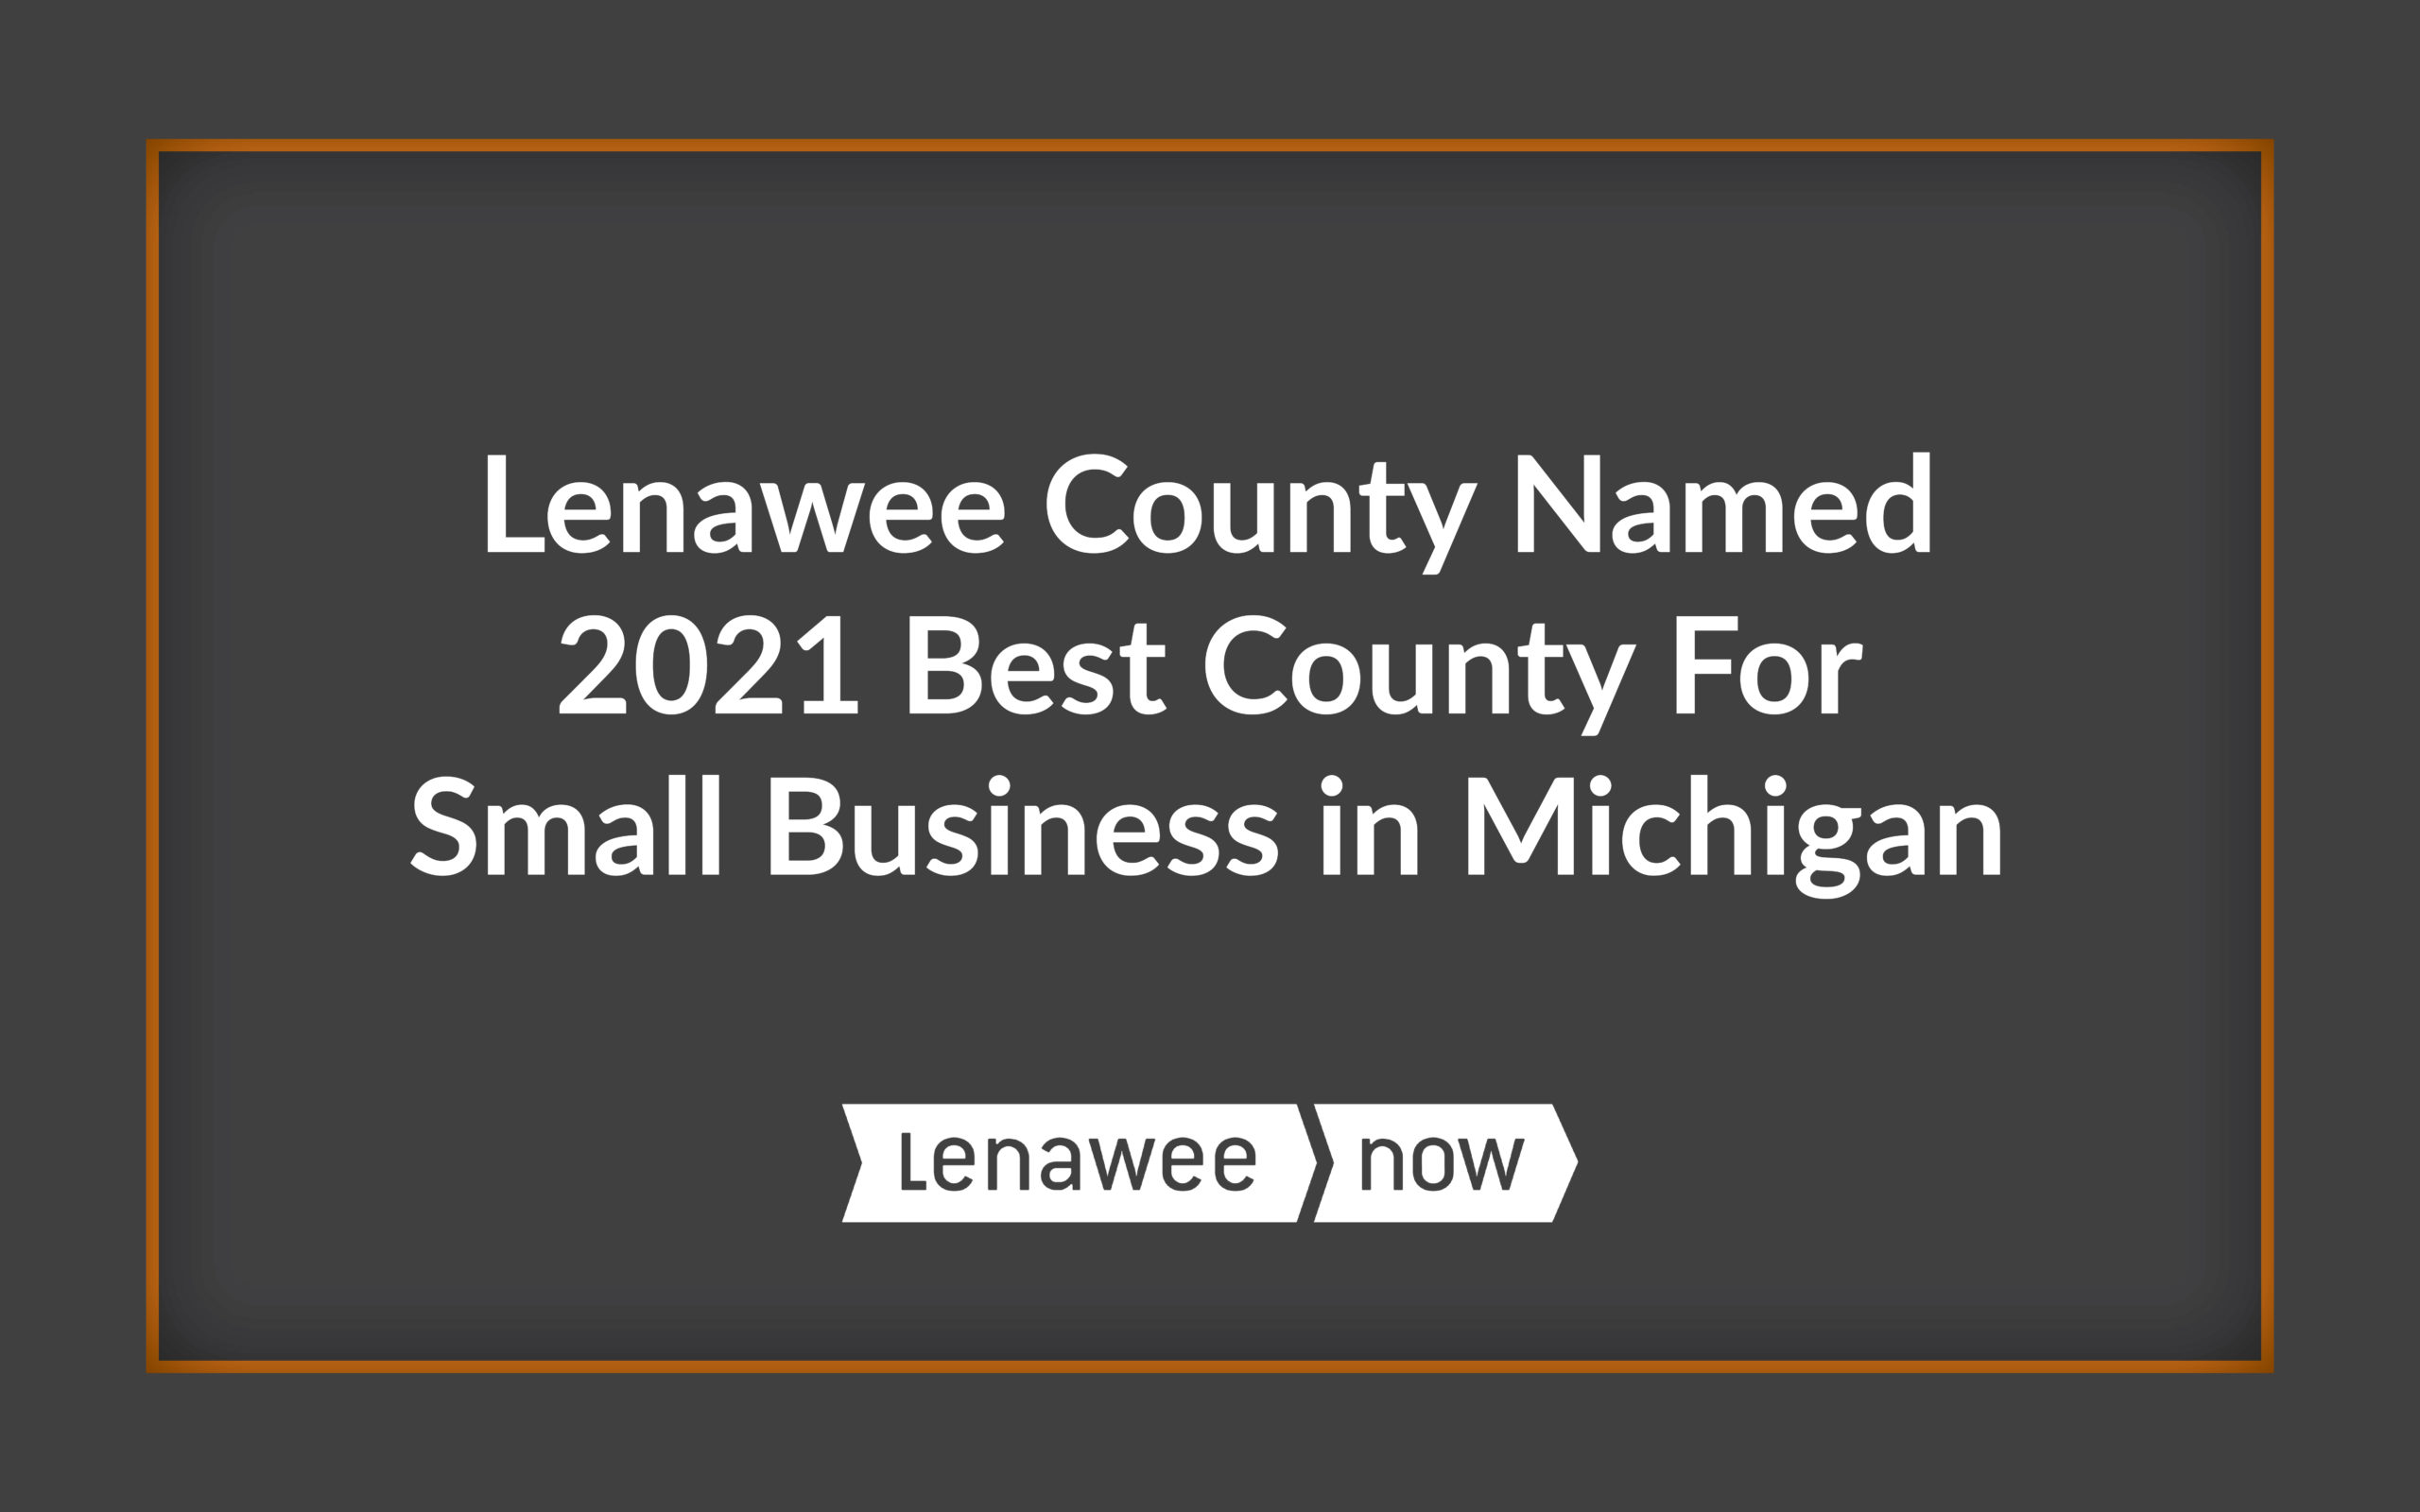 Lenawee County Named 2021 Best County For Small Business in Michigan